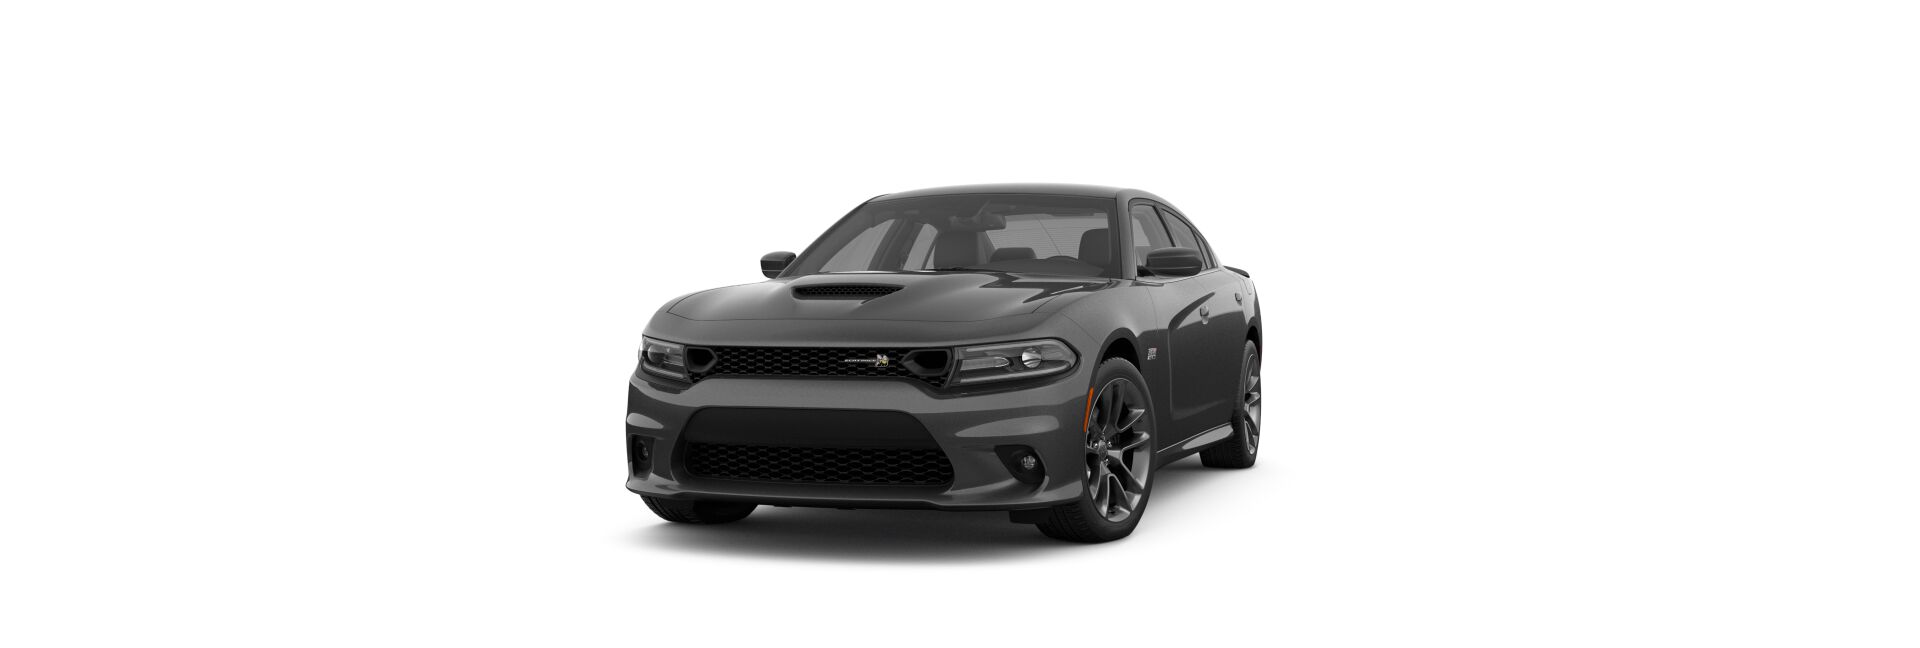 Dodge Charger  Scat pack 392 2021